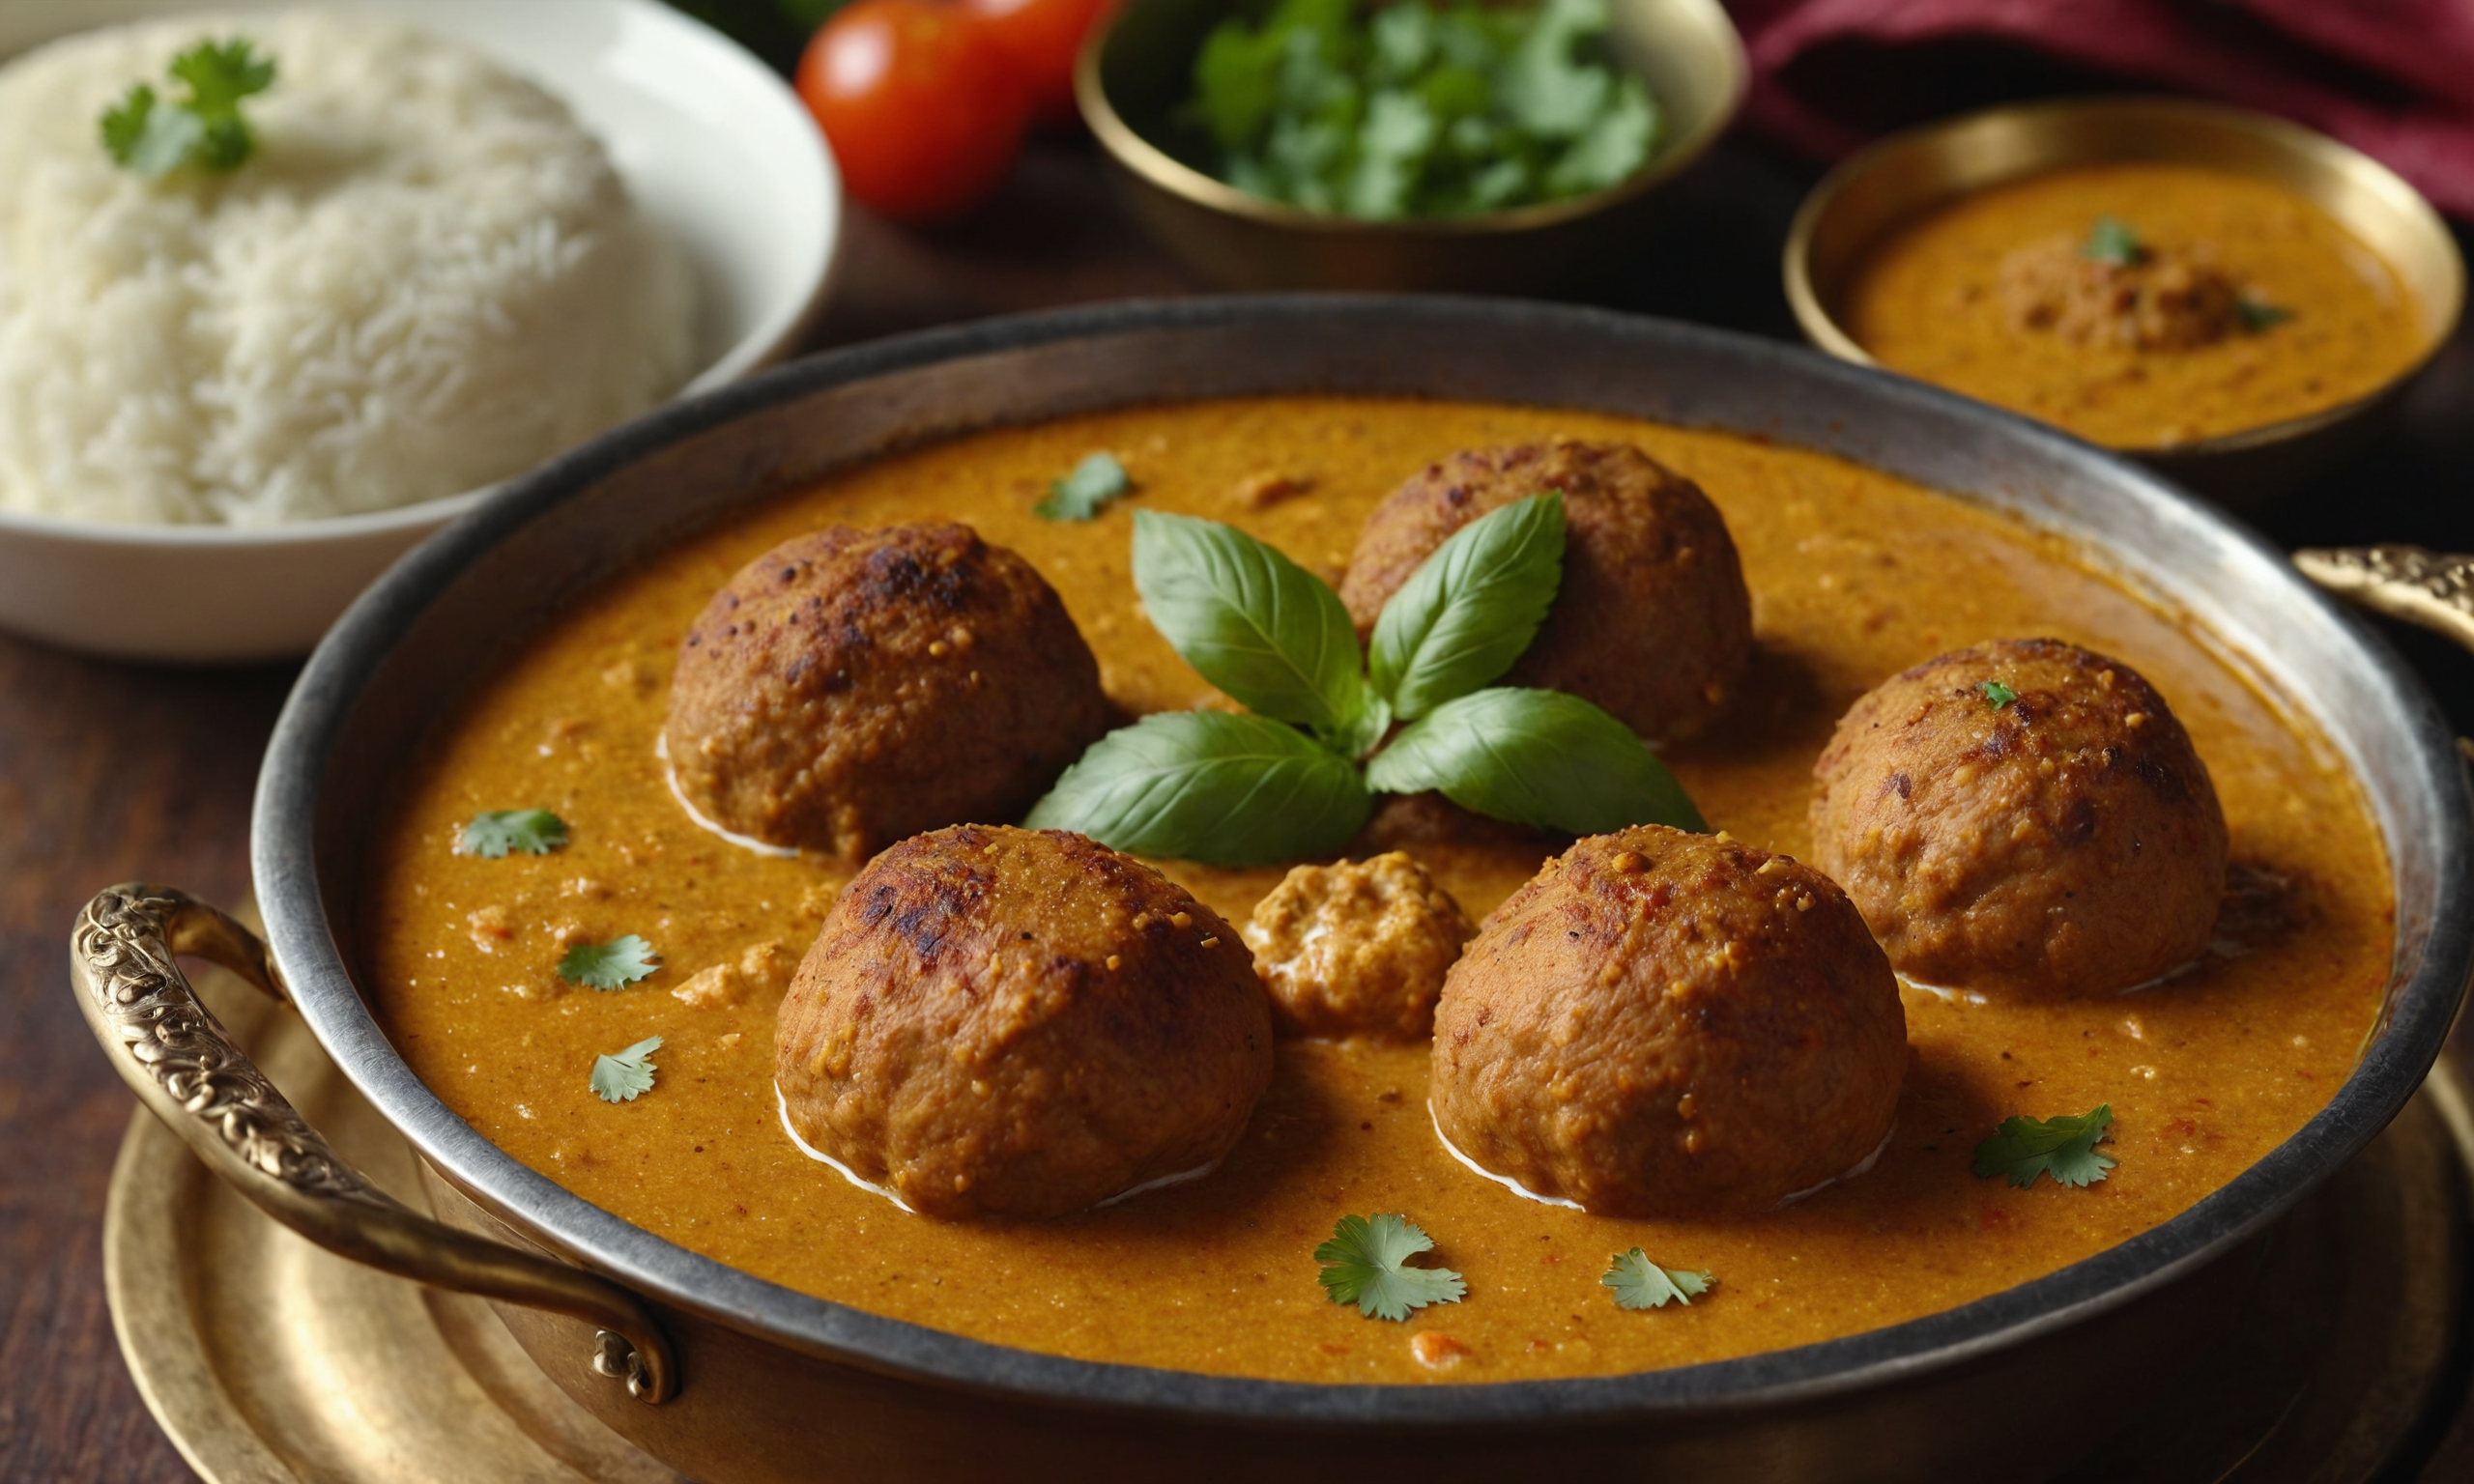 Malai Kofta: Creamy and flavourful Indian dish with fried dumplings in a rich gravy.